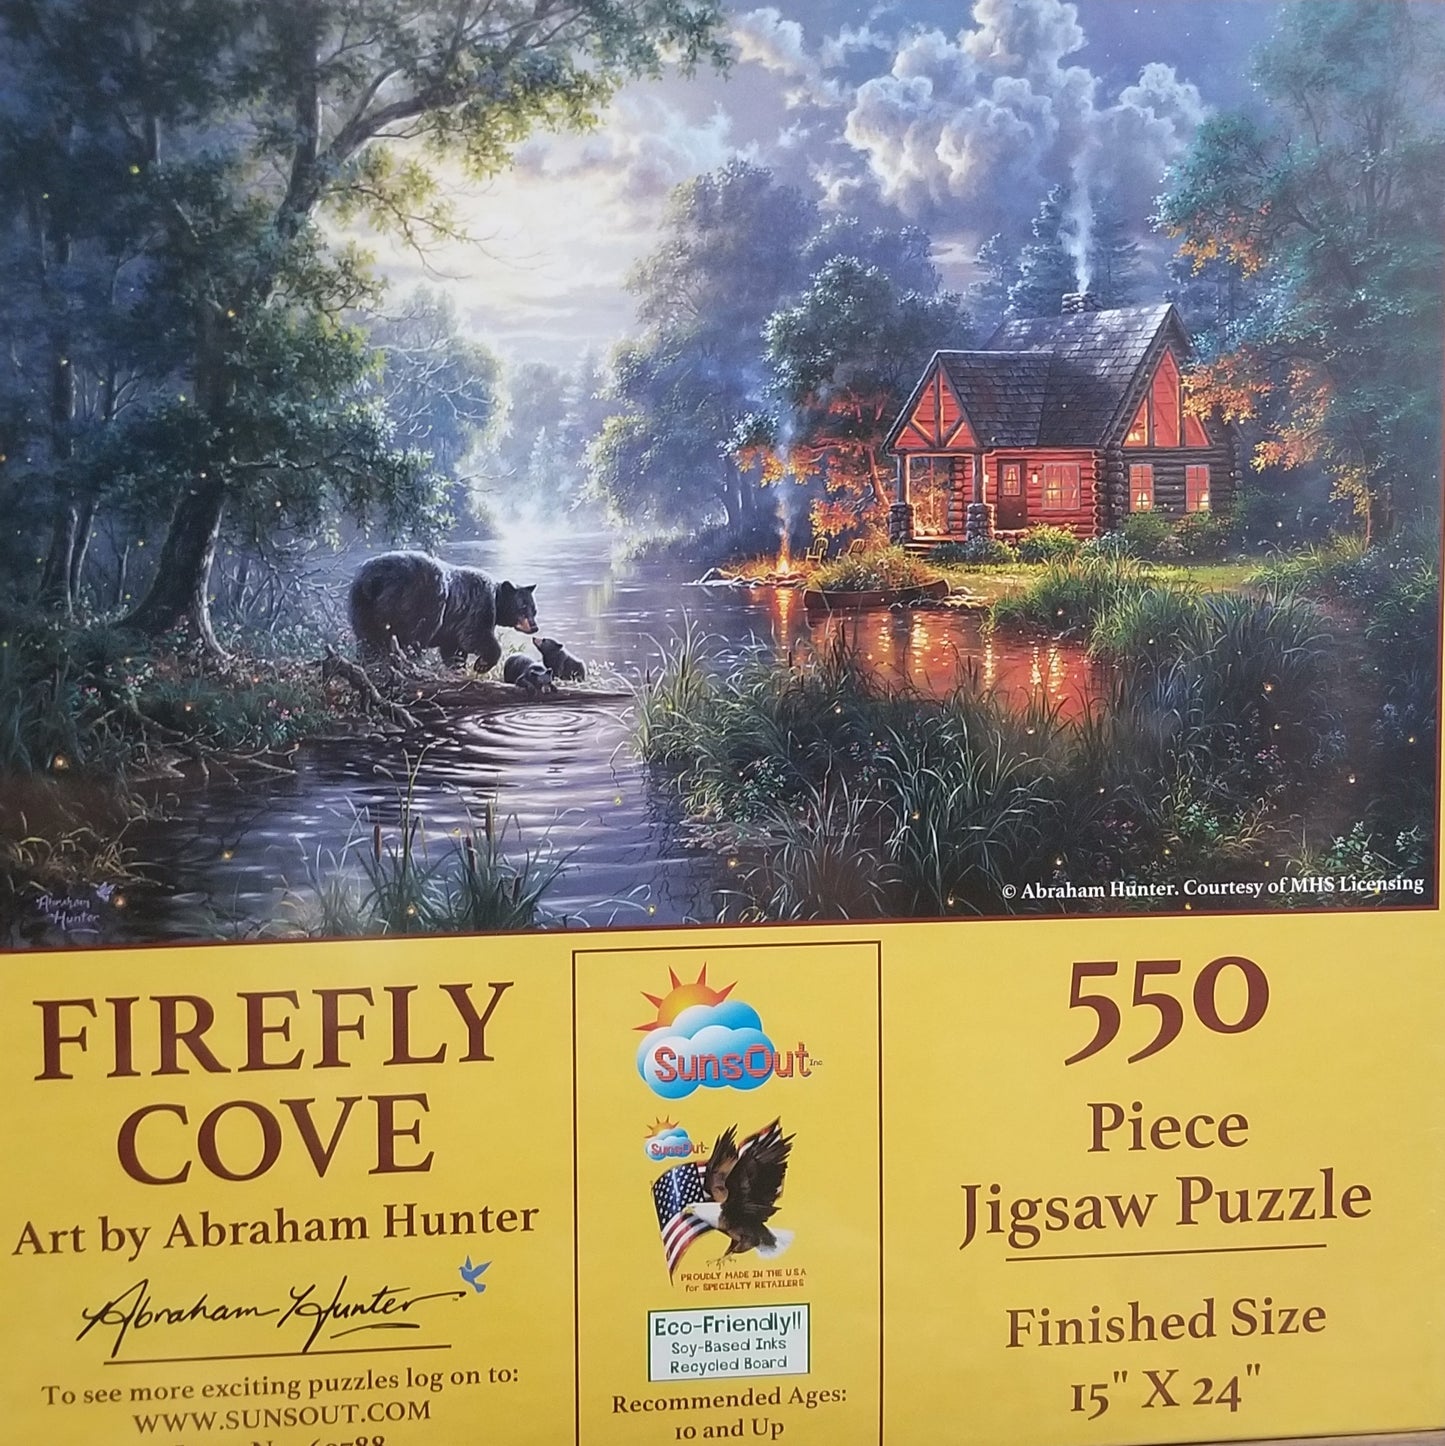 Firefly Cove by Abraham Hunter, 550 Piece Puzzle